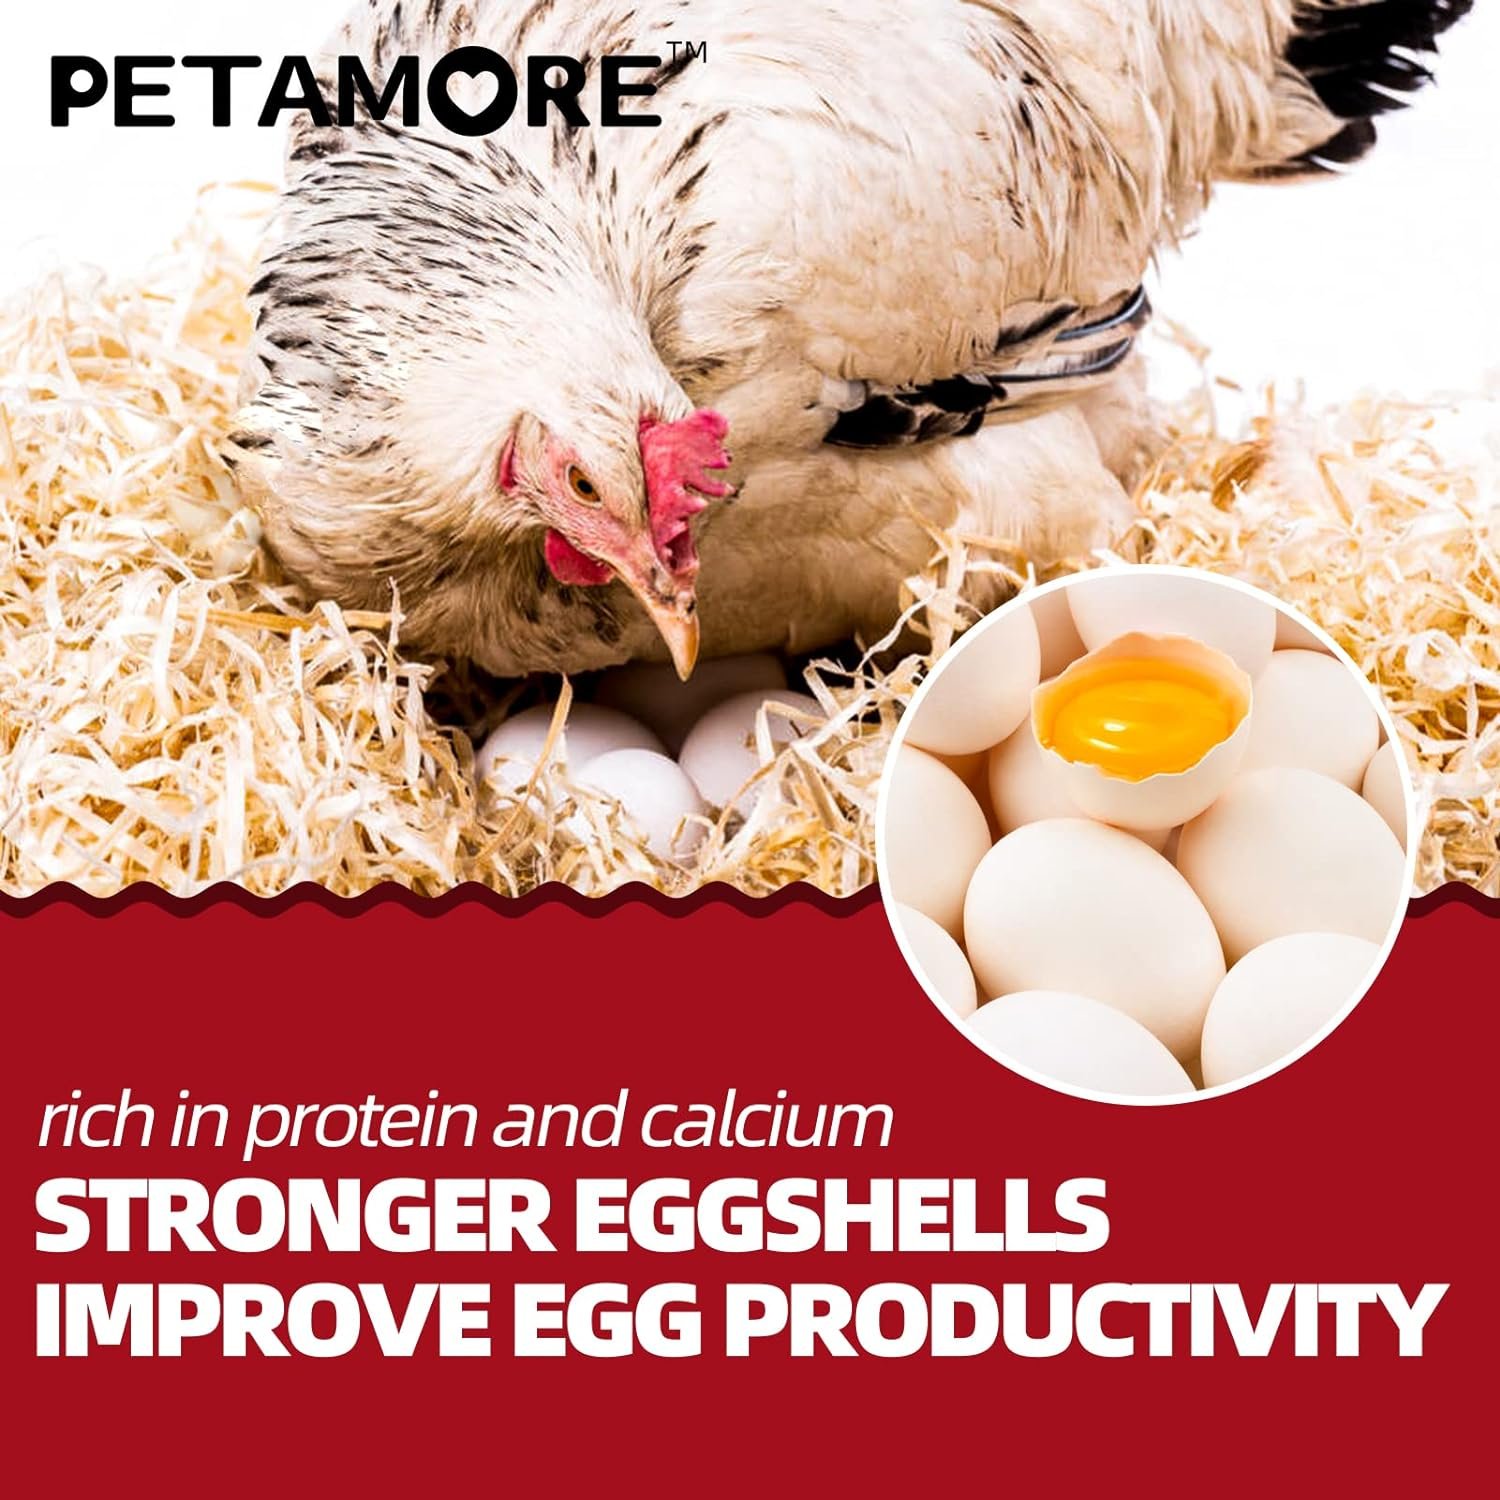 petamore 36 Premium Pulp Egg cartons- Together with 5Lbs Dried BSFL meally Worm Treats for Laying hens, Boosting More Eggs and Healthier Poultry